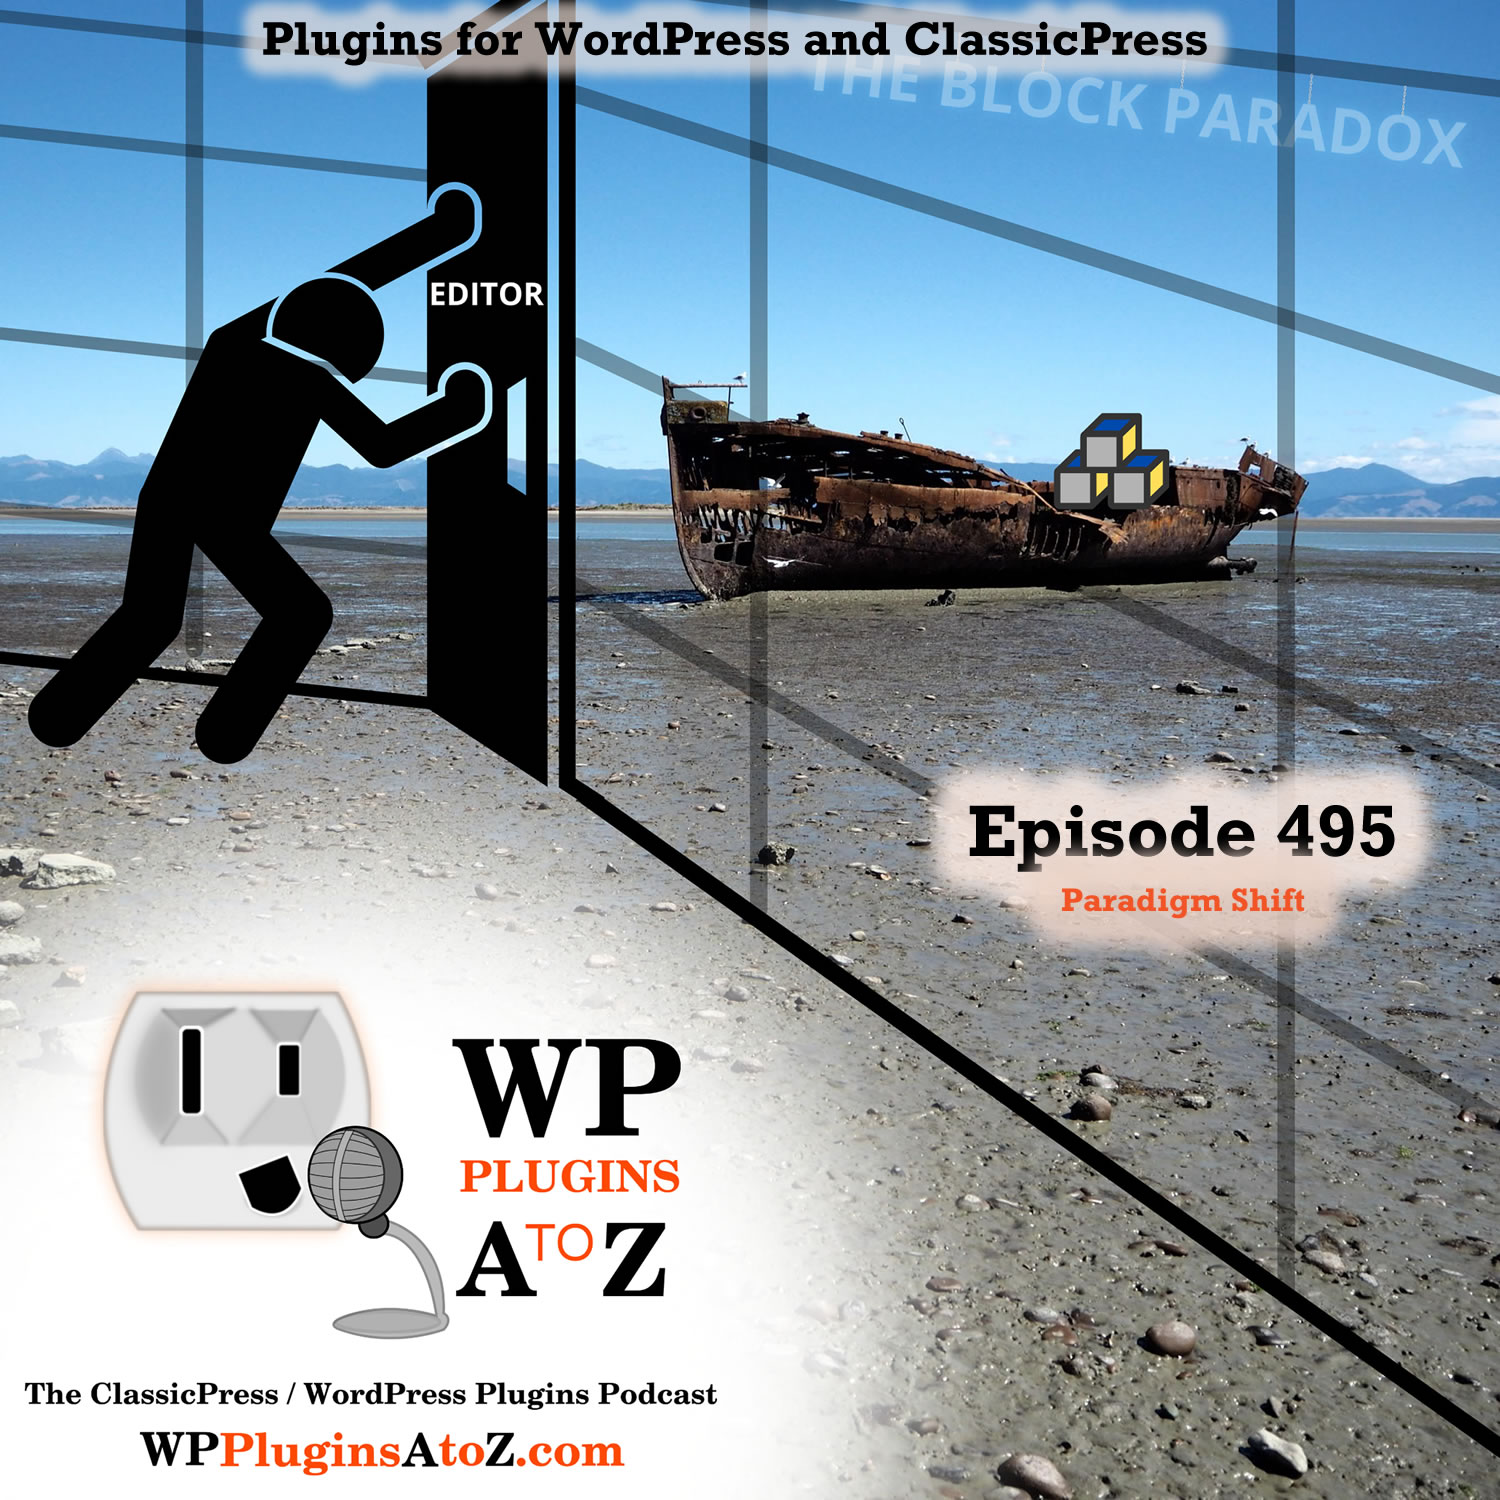 Paradigm Shift It's Episode 495 We have plugins for Hide & Seek, Email Automation, Stopping the Brutality, Mobile Content, Image Control, Live Chat ..., and ClassicPress Options.